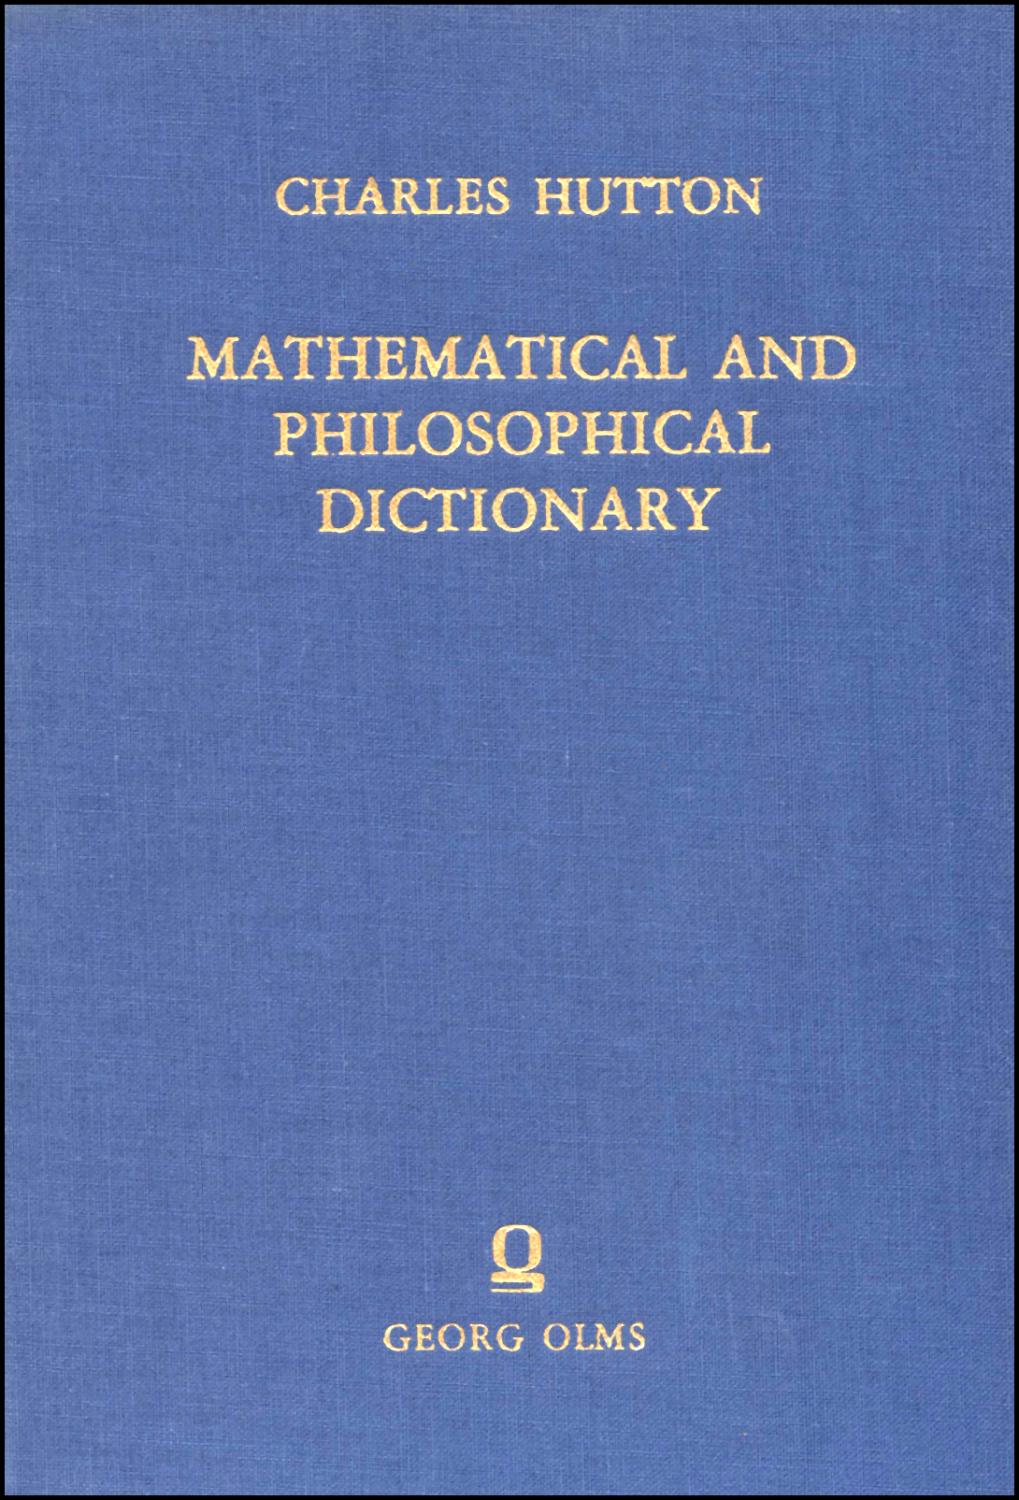 Mathematical and Philosophical Dictionary Containing an explanation of the terms, and an account of the several subjects comprized under the heads Mathematics, Astronomy, and Philosophy, both natural and experimental: with an historical account of the rise, progress, and present state of the sciences, also Memoirs of the lives and writings of the most eminent Authors ... Vol. 1: A J.London 1795. Reprint: Hildesheim 1973. VIII/650 pp. mit graph. Darst.